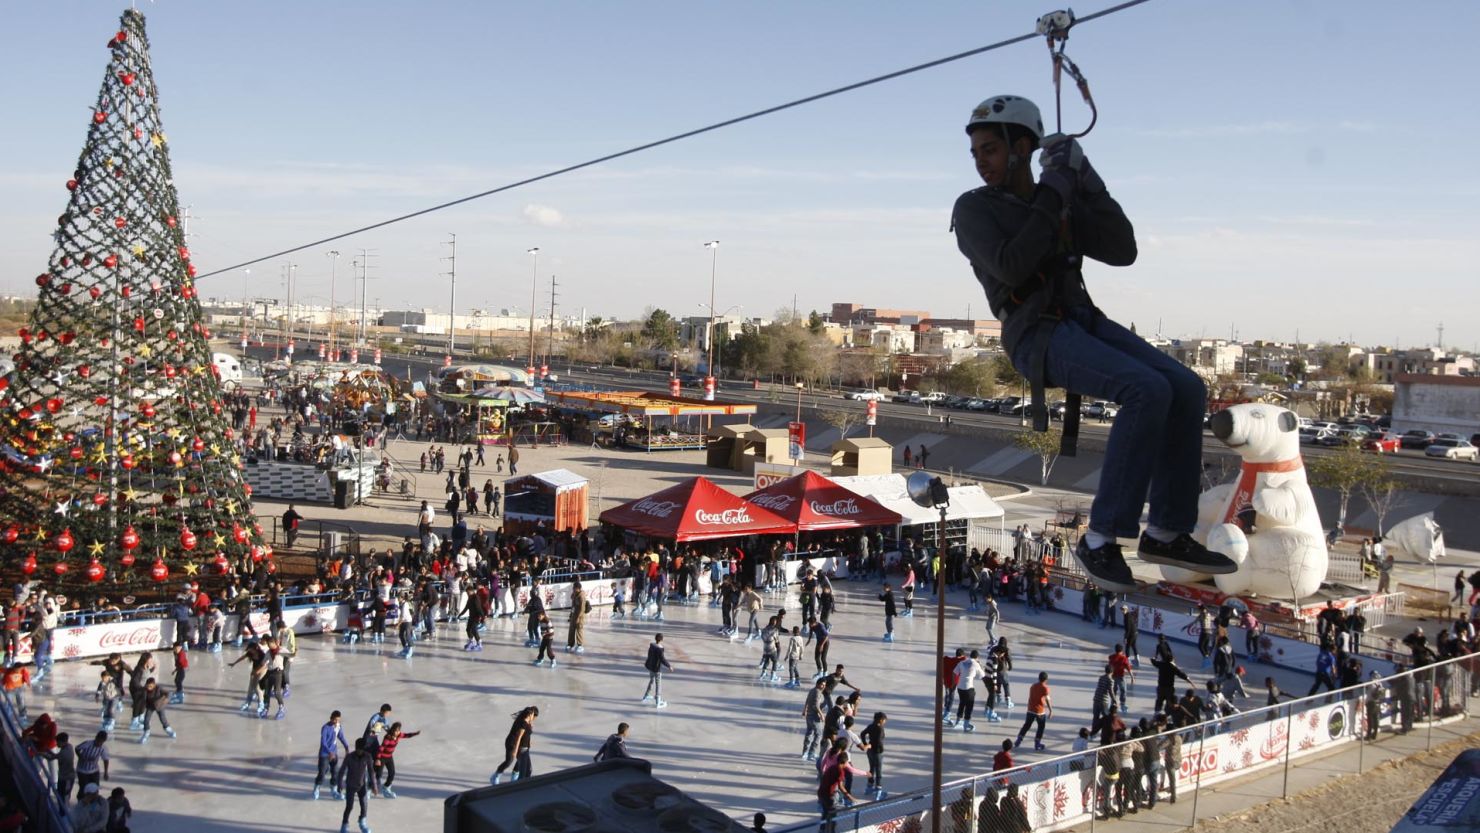 An ice rink in Ciudad Juarez, Mexico, is crowded with skaters as a zip liner passes overhead.